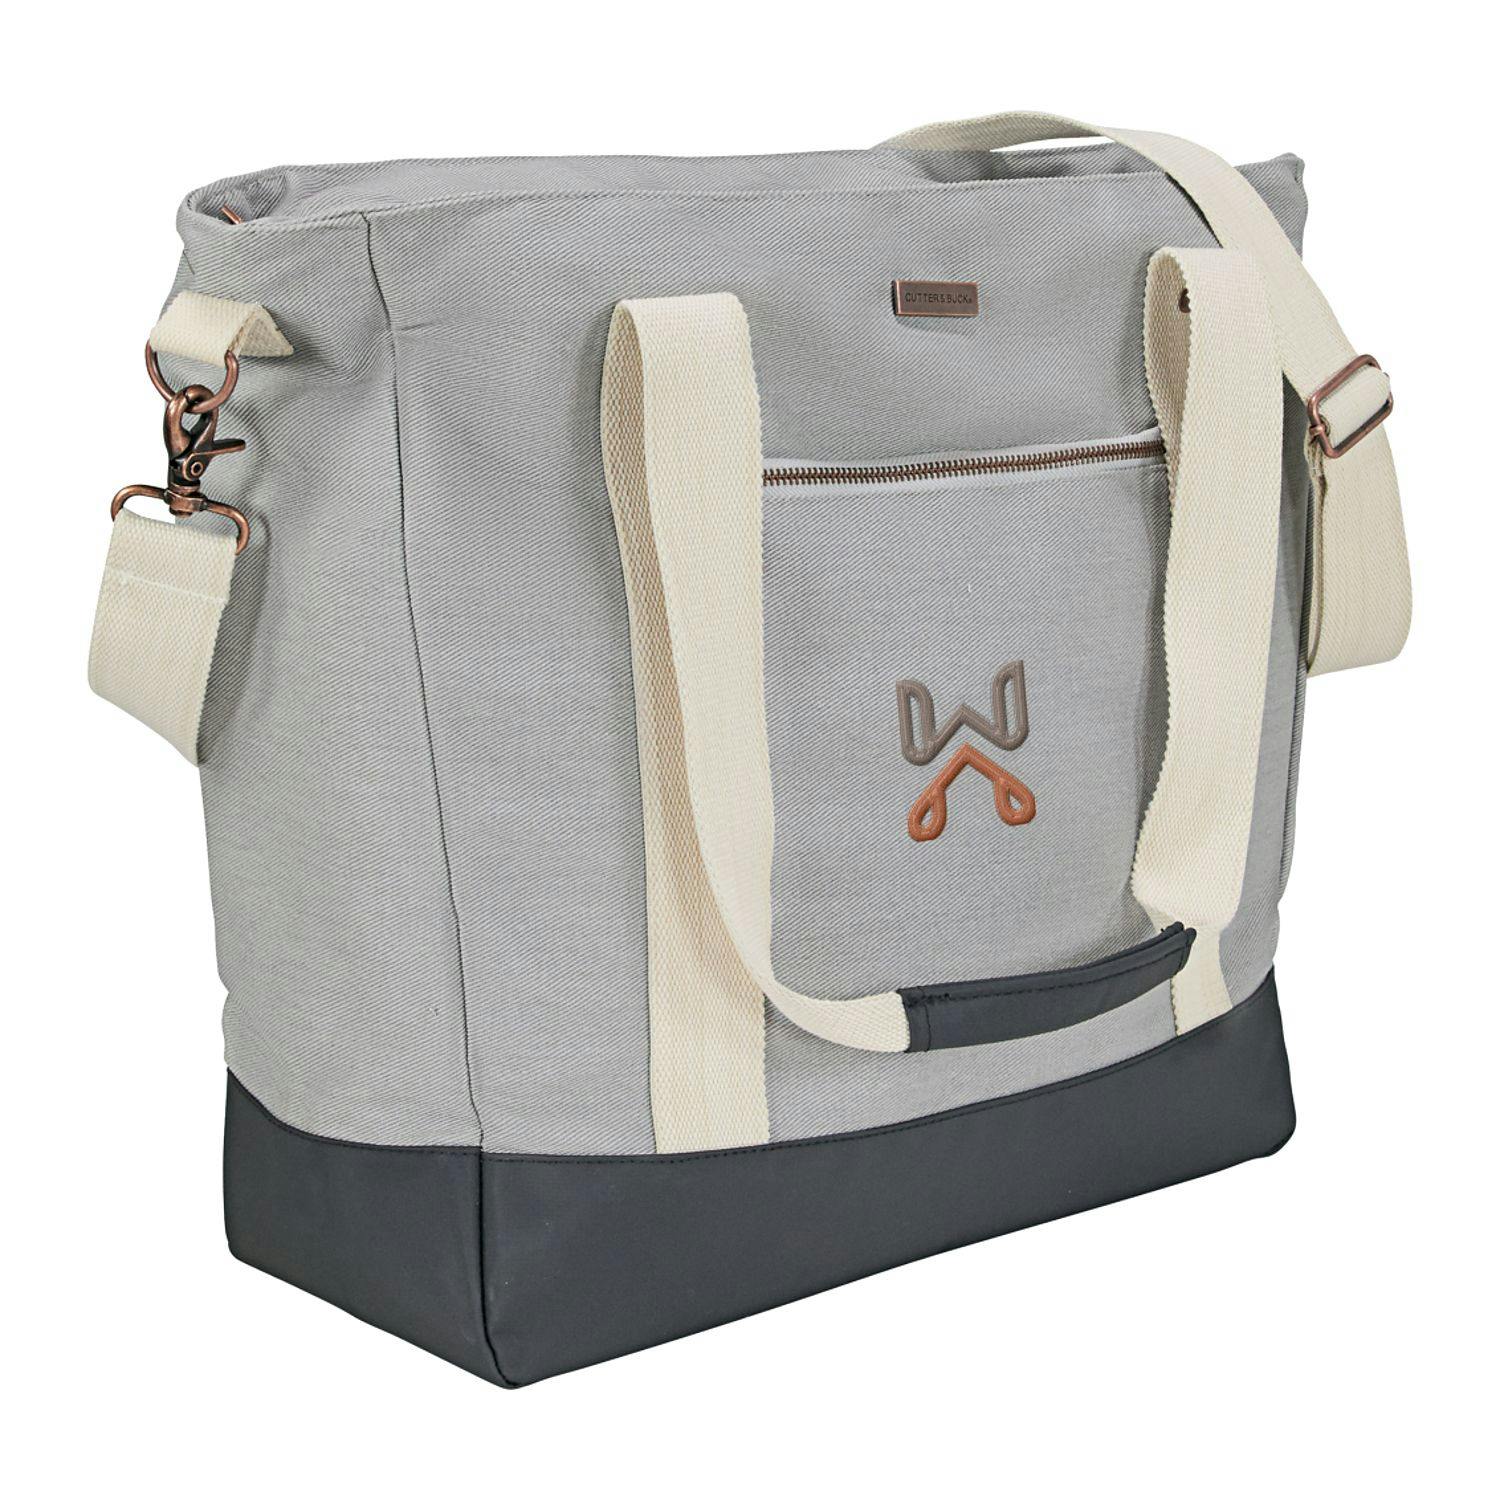 Cutter & Buck® Cotton Computer Tote - additional Image 4